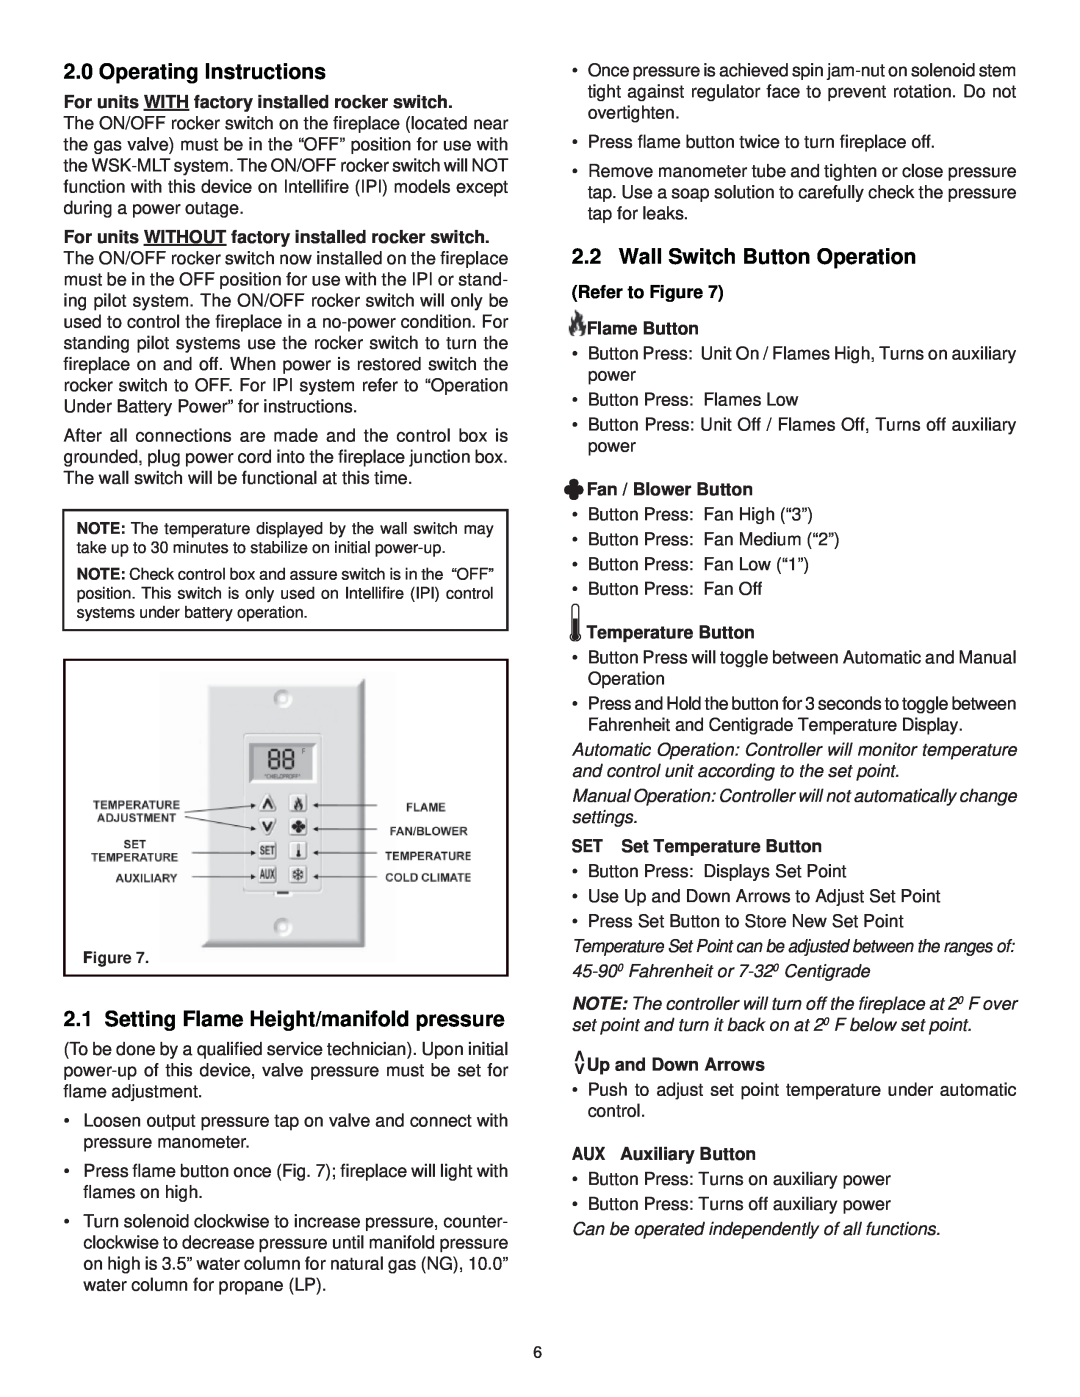 Hearth and Home Technologies WSK-MLT Operating Instructions, Setting Flame Height/manifold pressure, Refer to Flame Button 